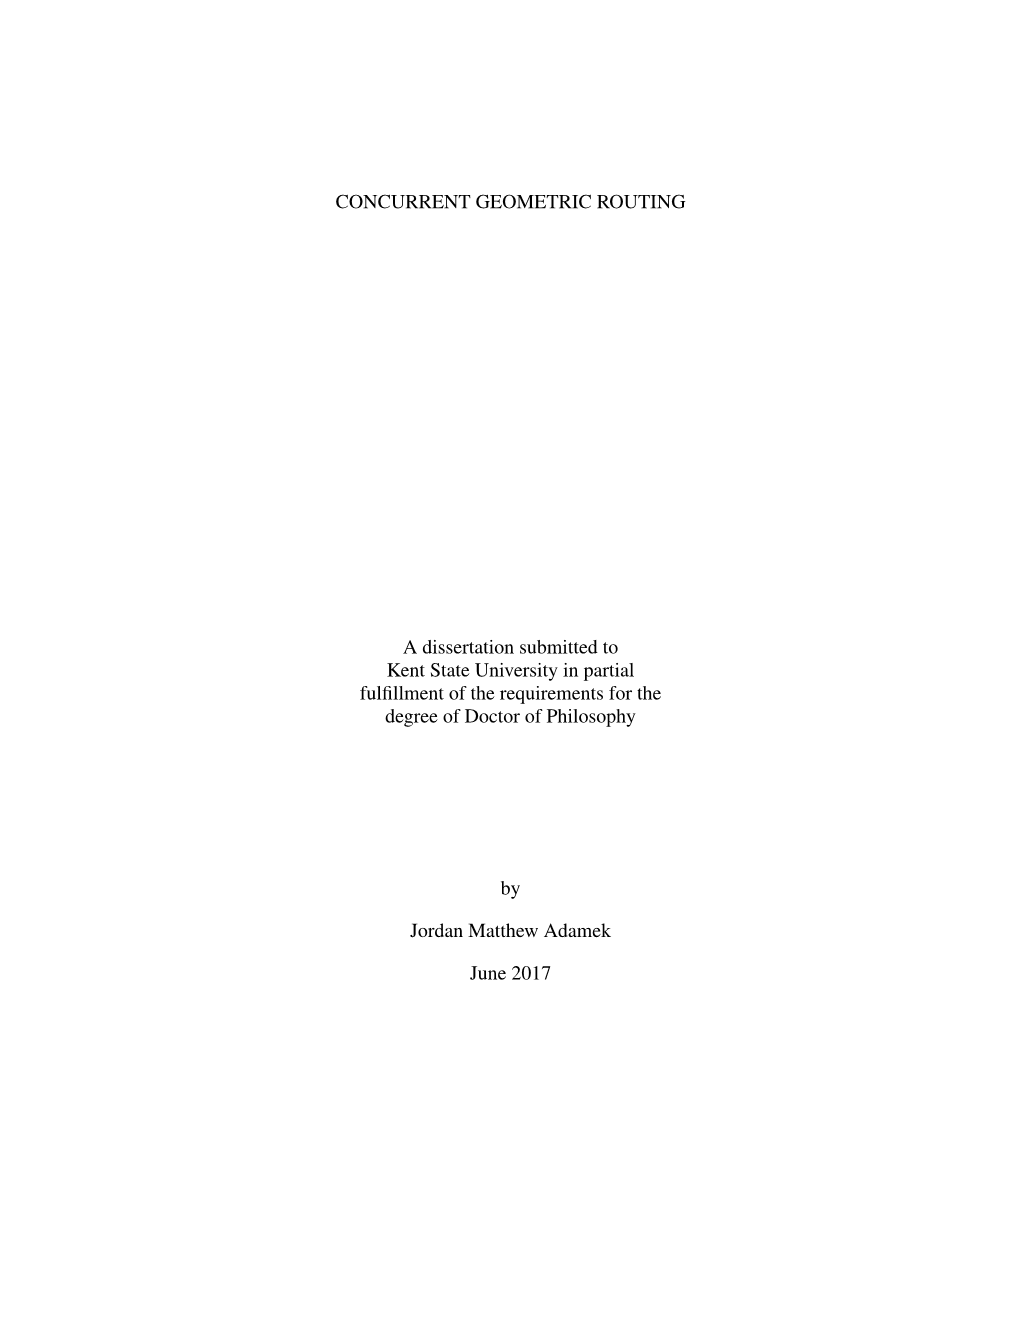 CONCURRENT GEOMETRIC ROUTING a Dissertation Submitted to Kent State University in Partial Fulfillment of the Requirements for Th